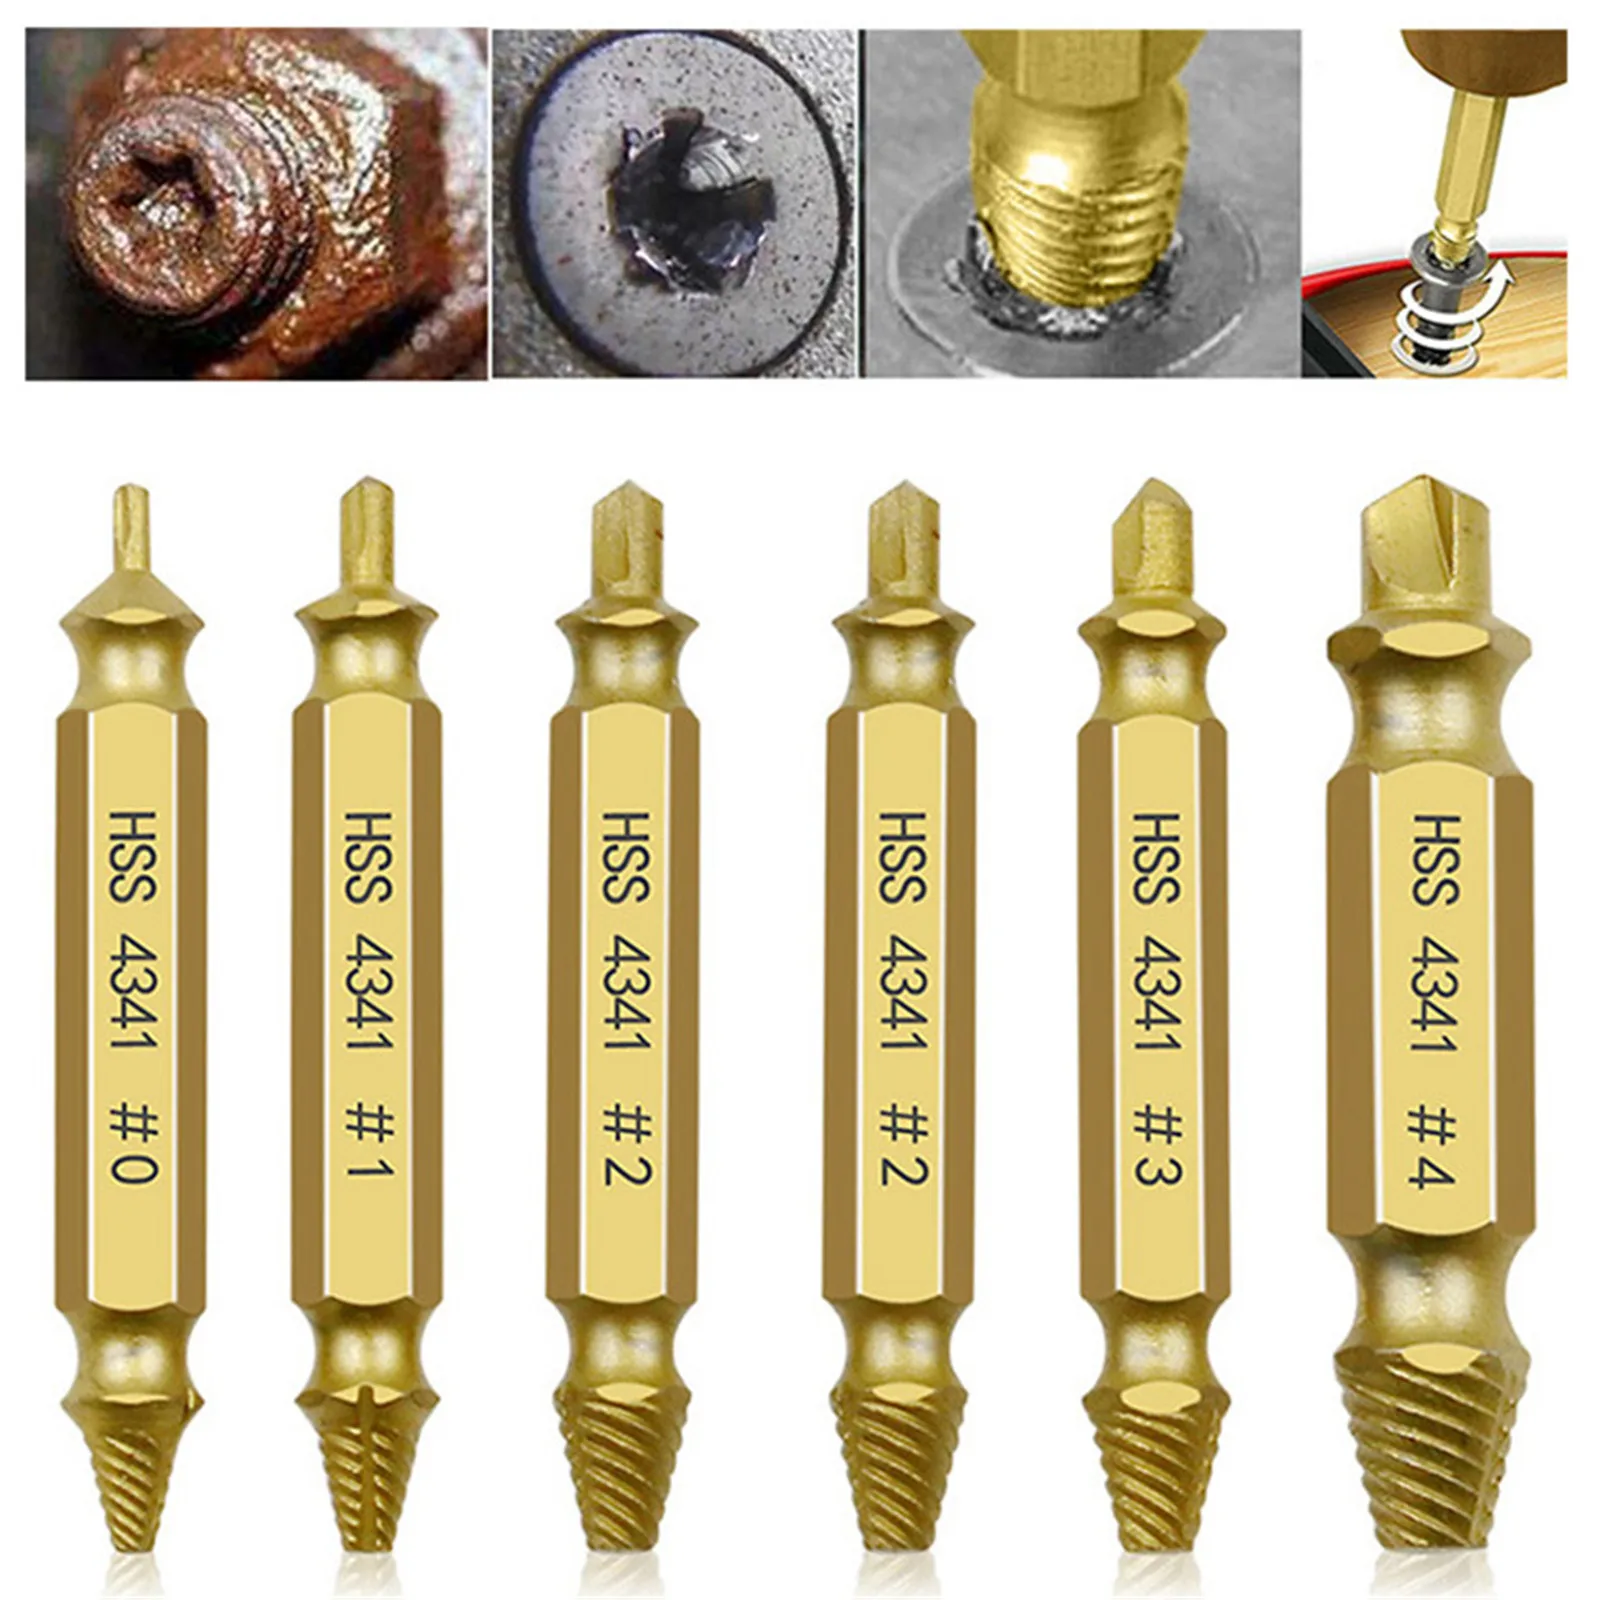 

6pcs HSS Damaged Screw Extractor Drill Stripped Screw Extractor Remover Set Double Ended Broken Screw Bolt Demolition Tools